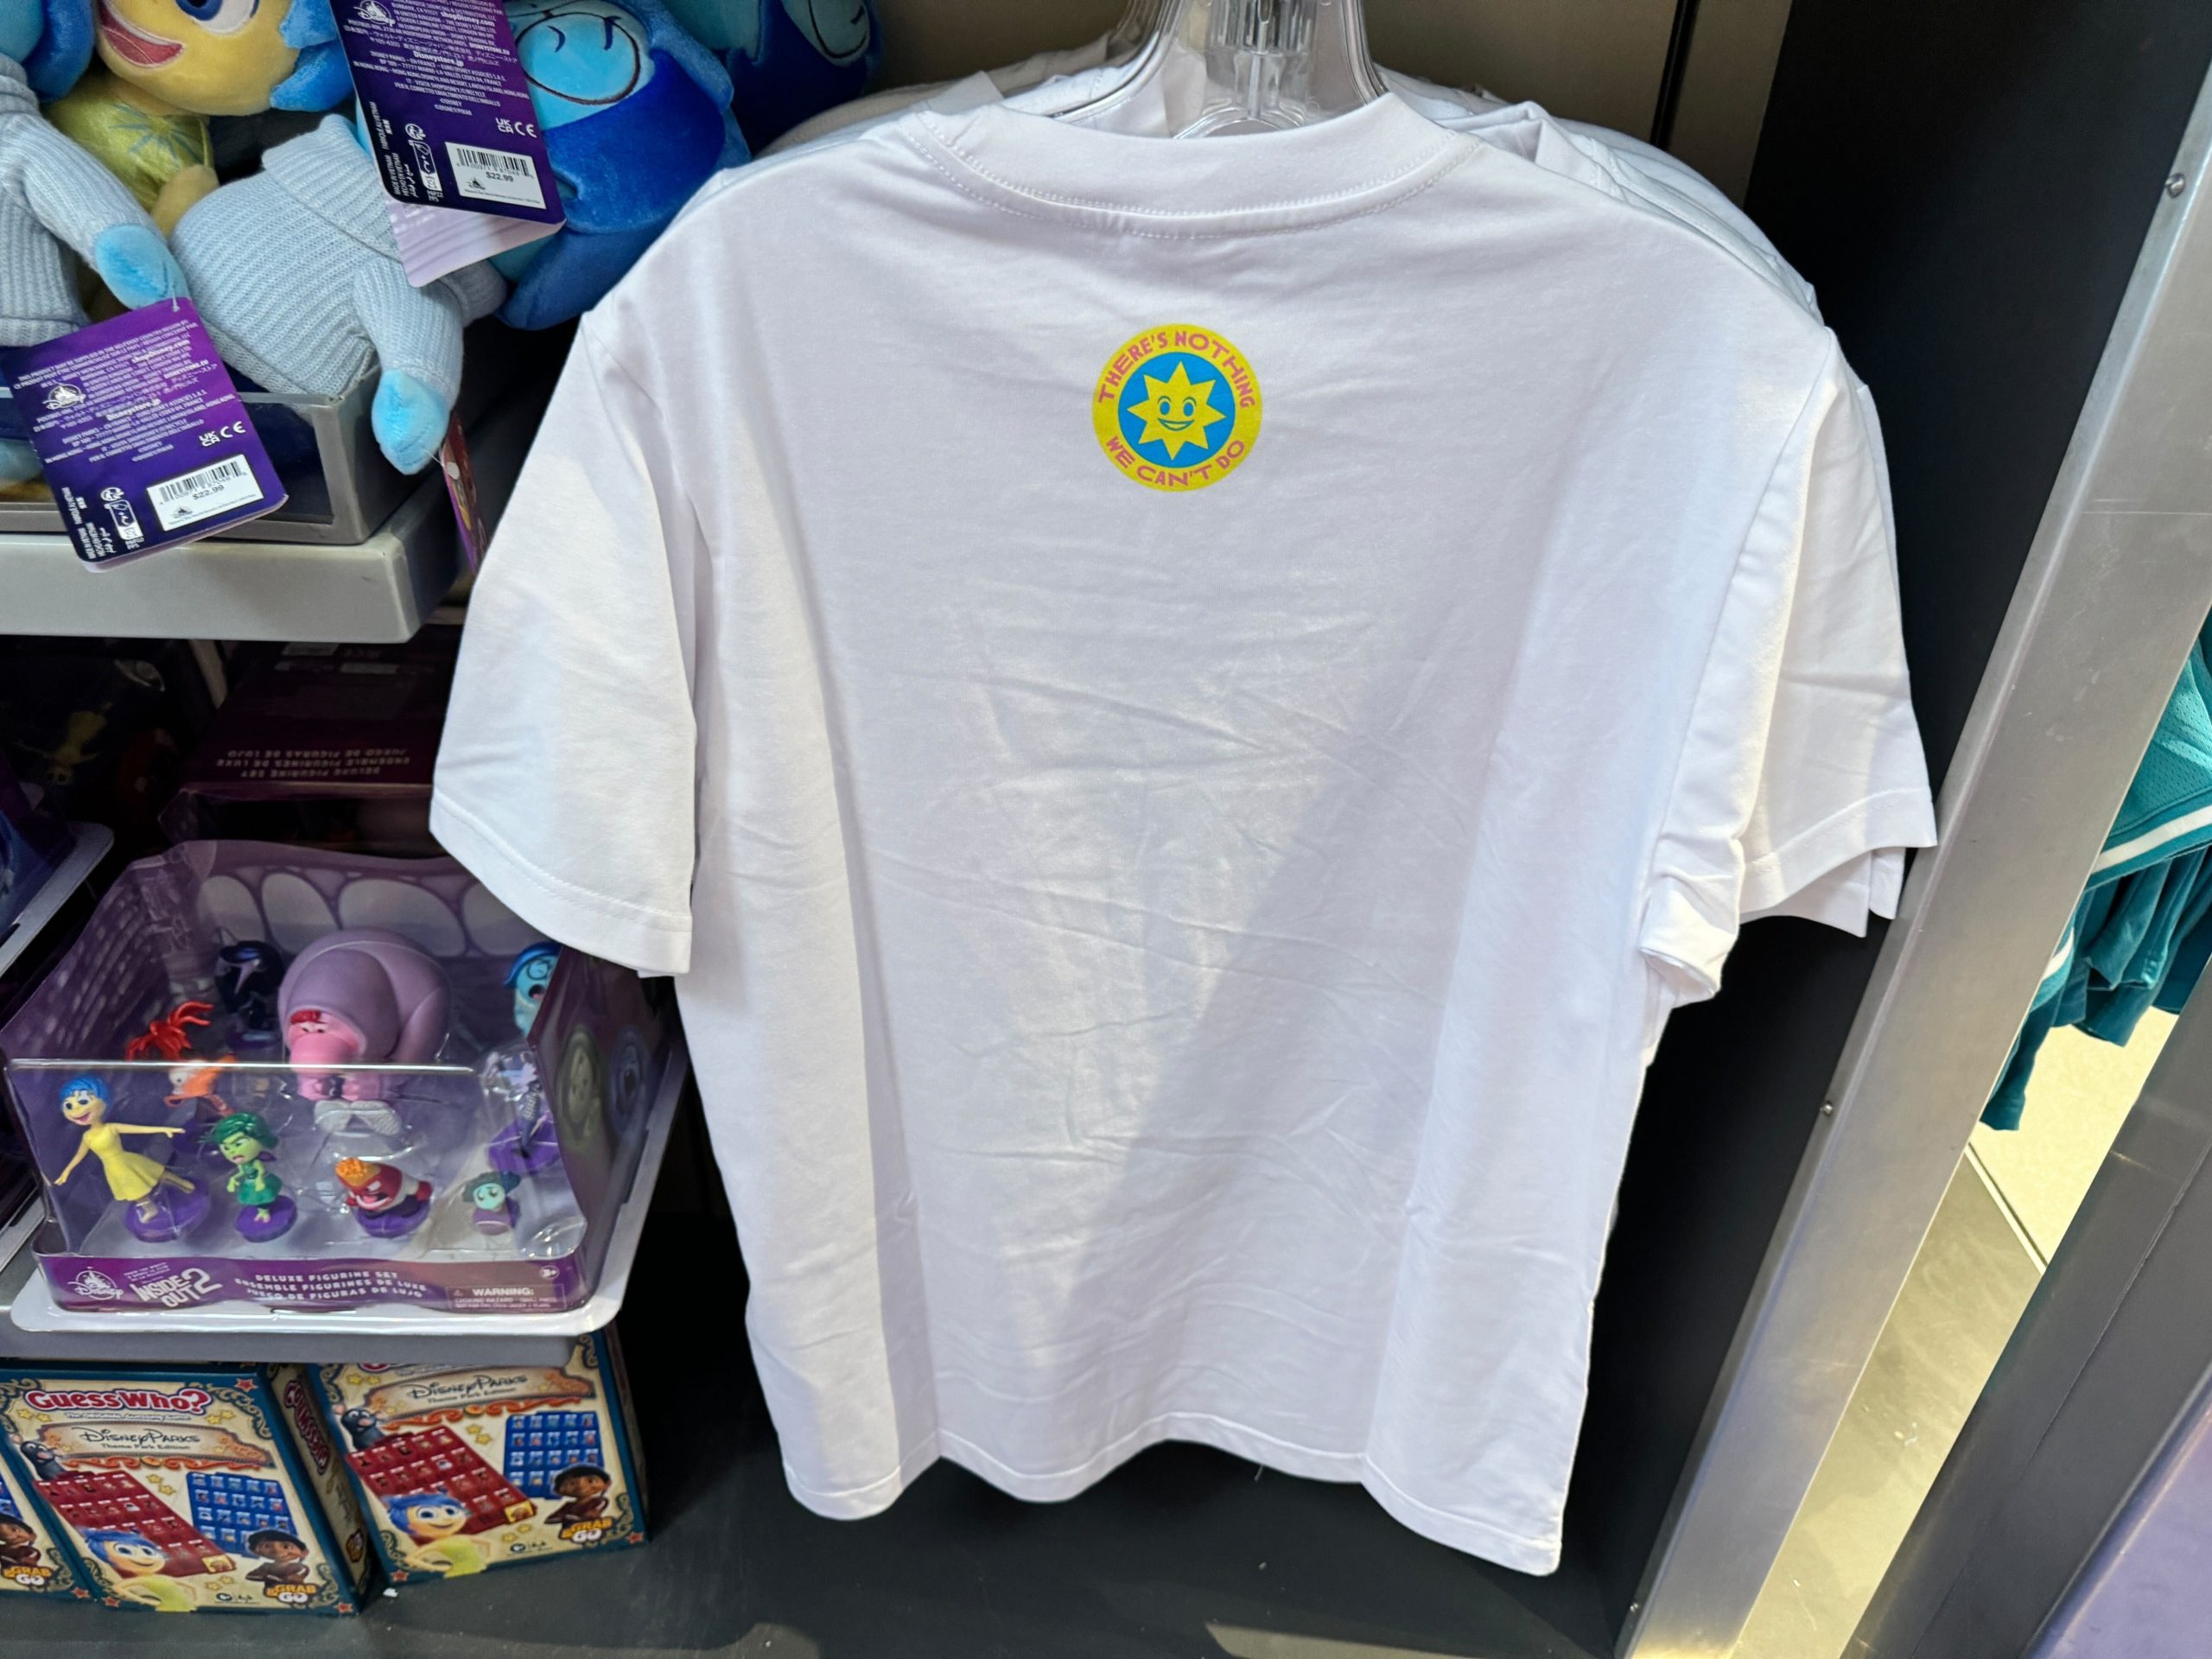 Inside Out 2 merchandise